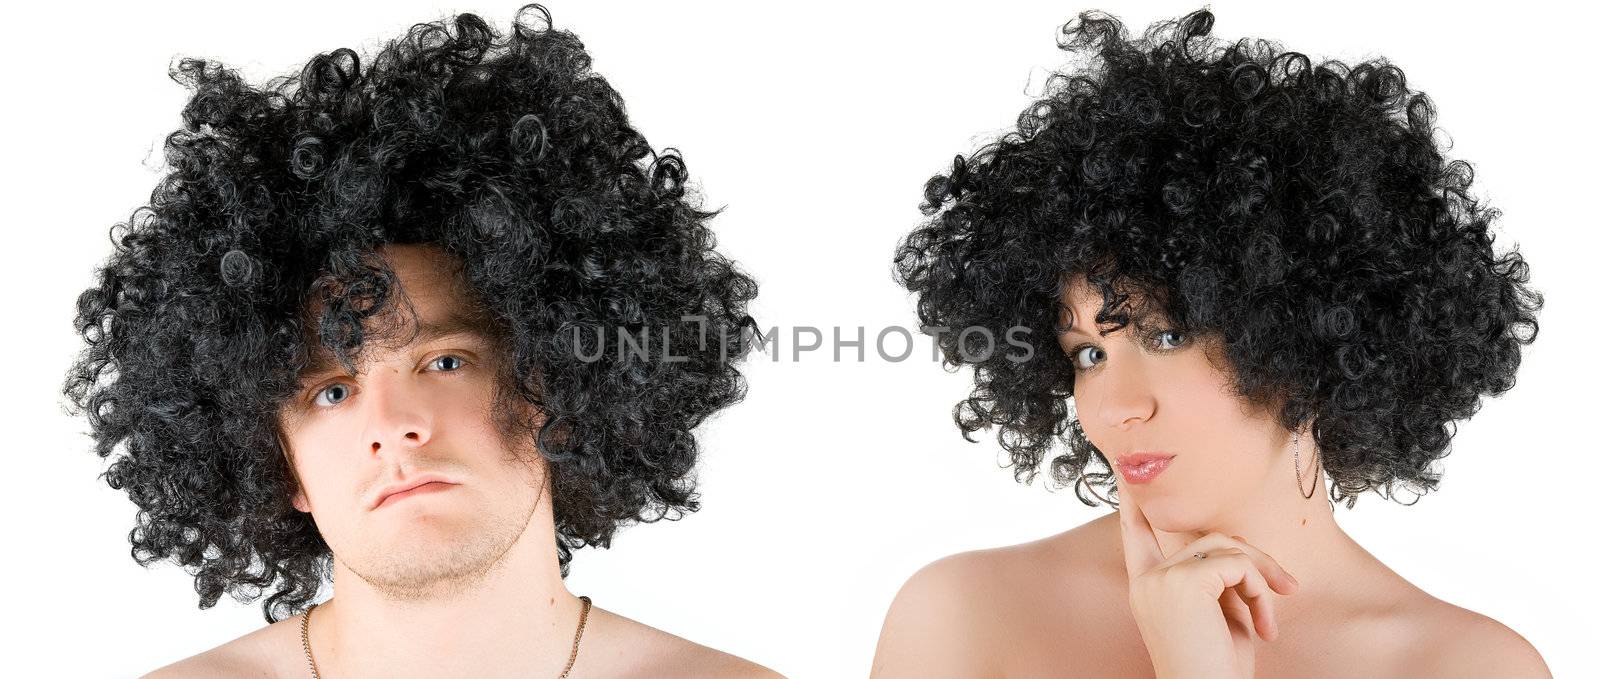 frizzy woman and man by rusak